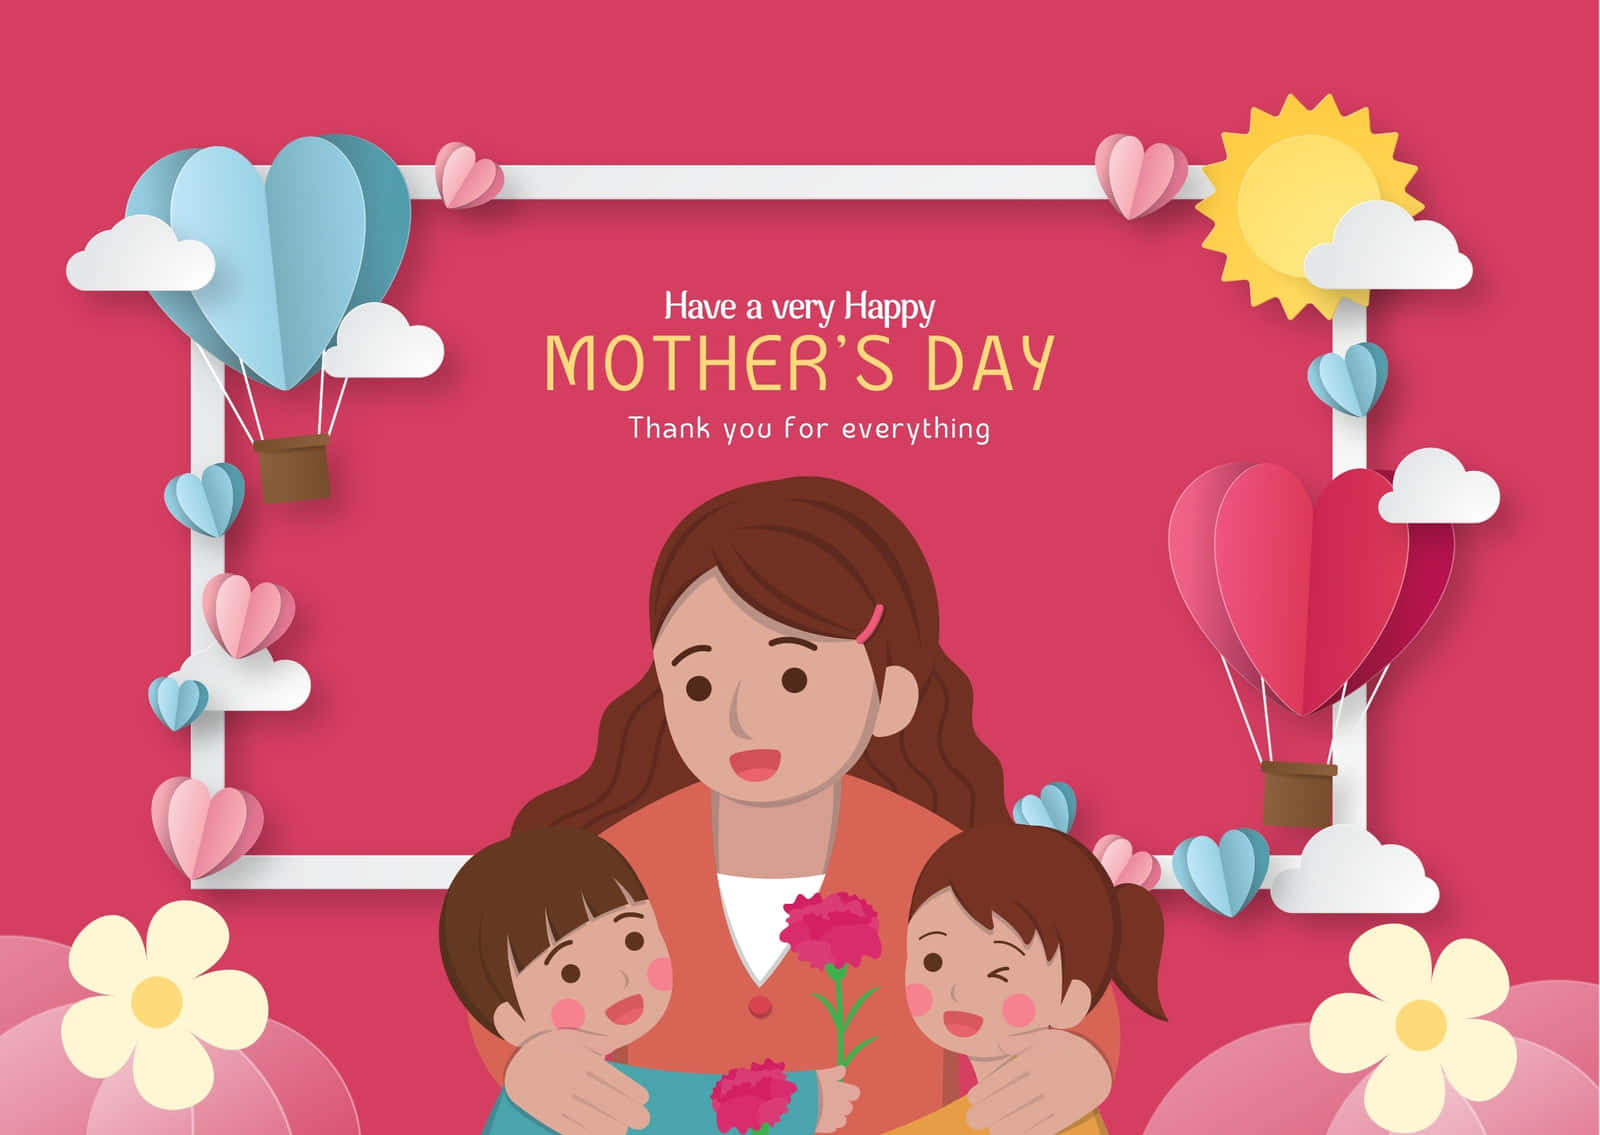 Mother's Day Greeting Card With A Mother And Her Children